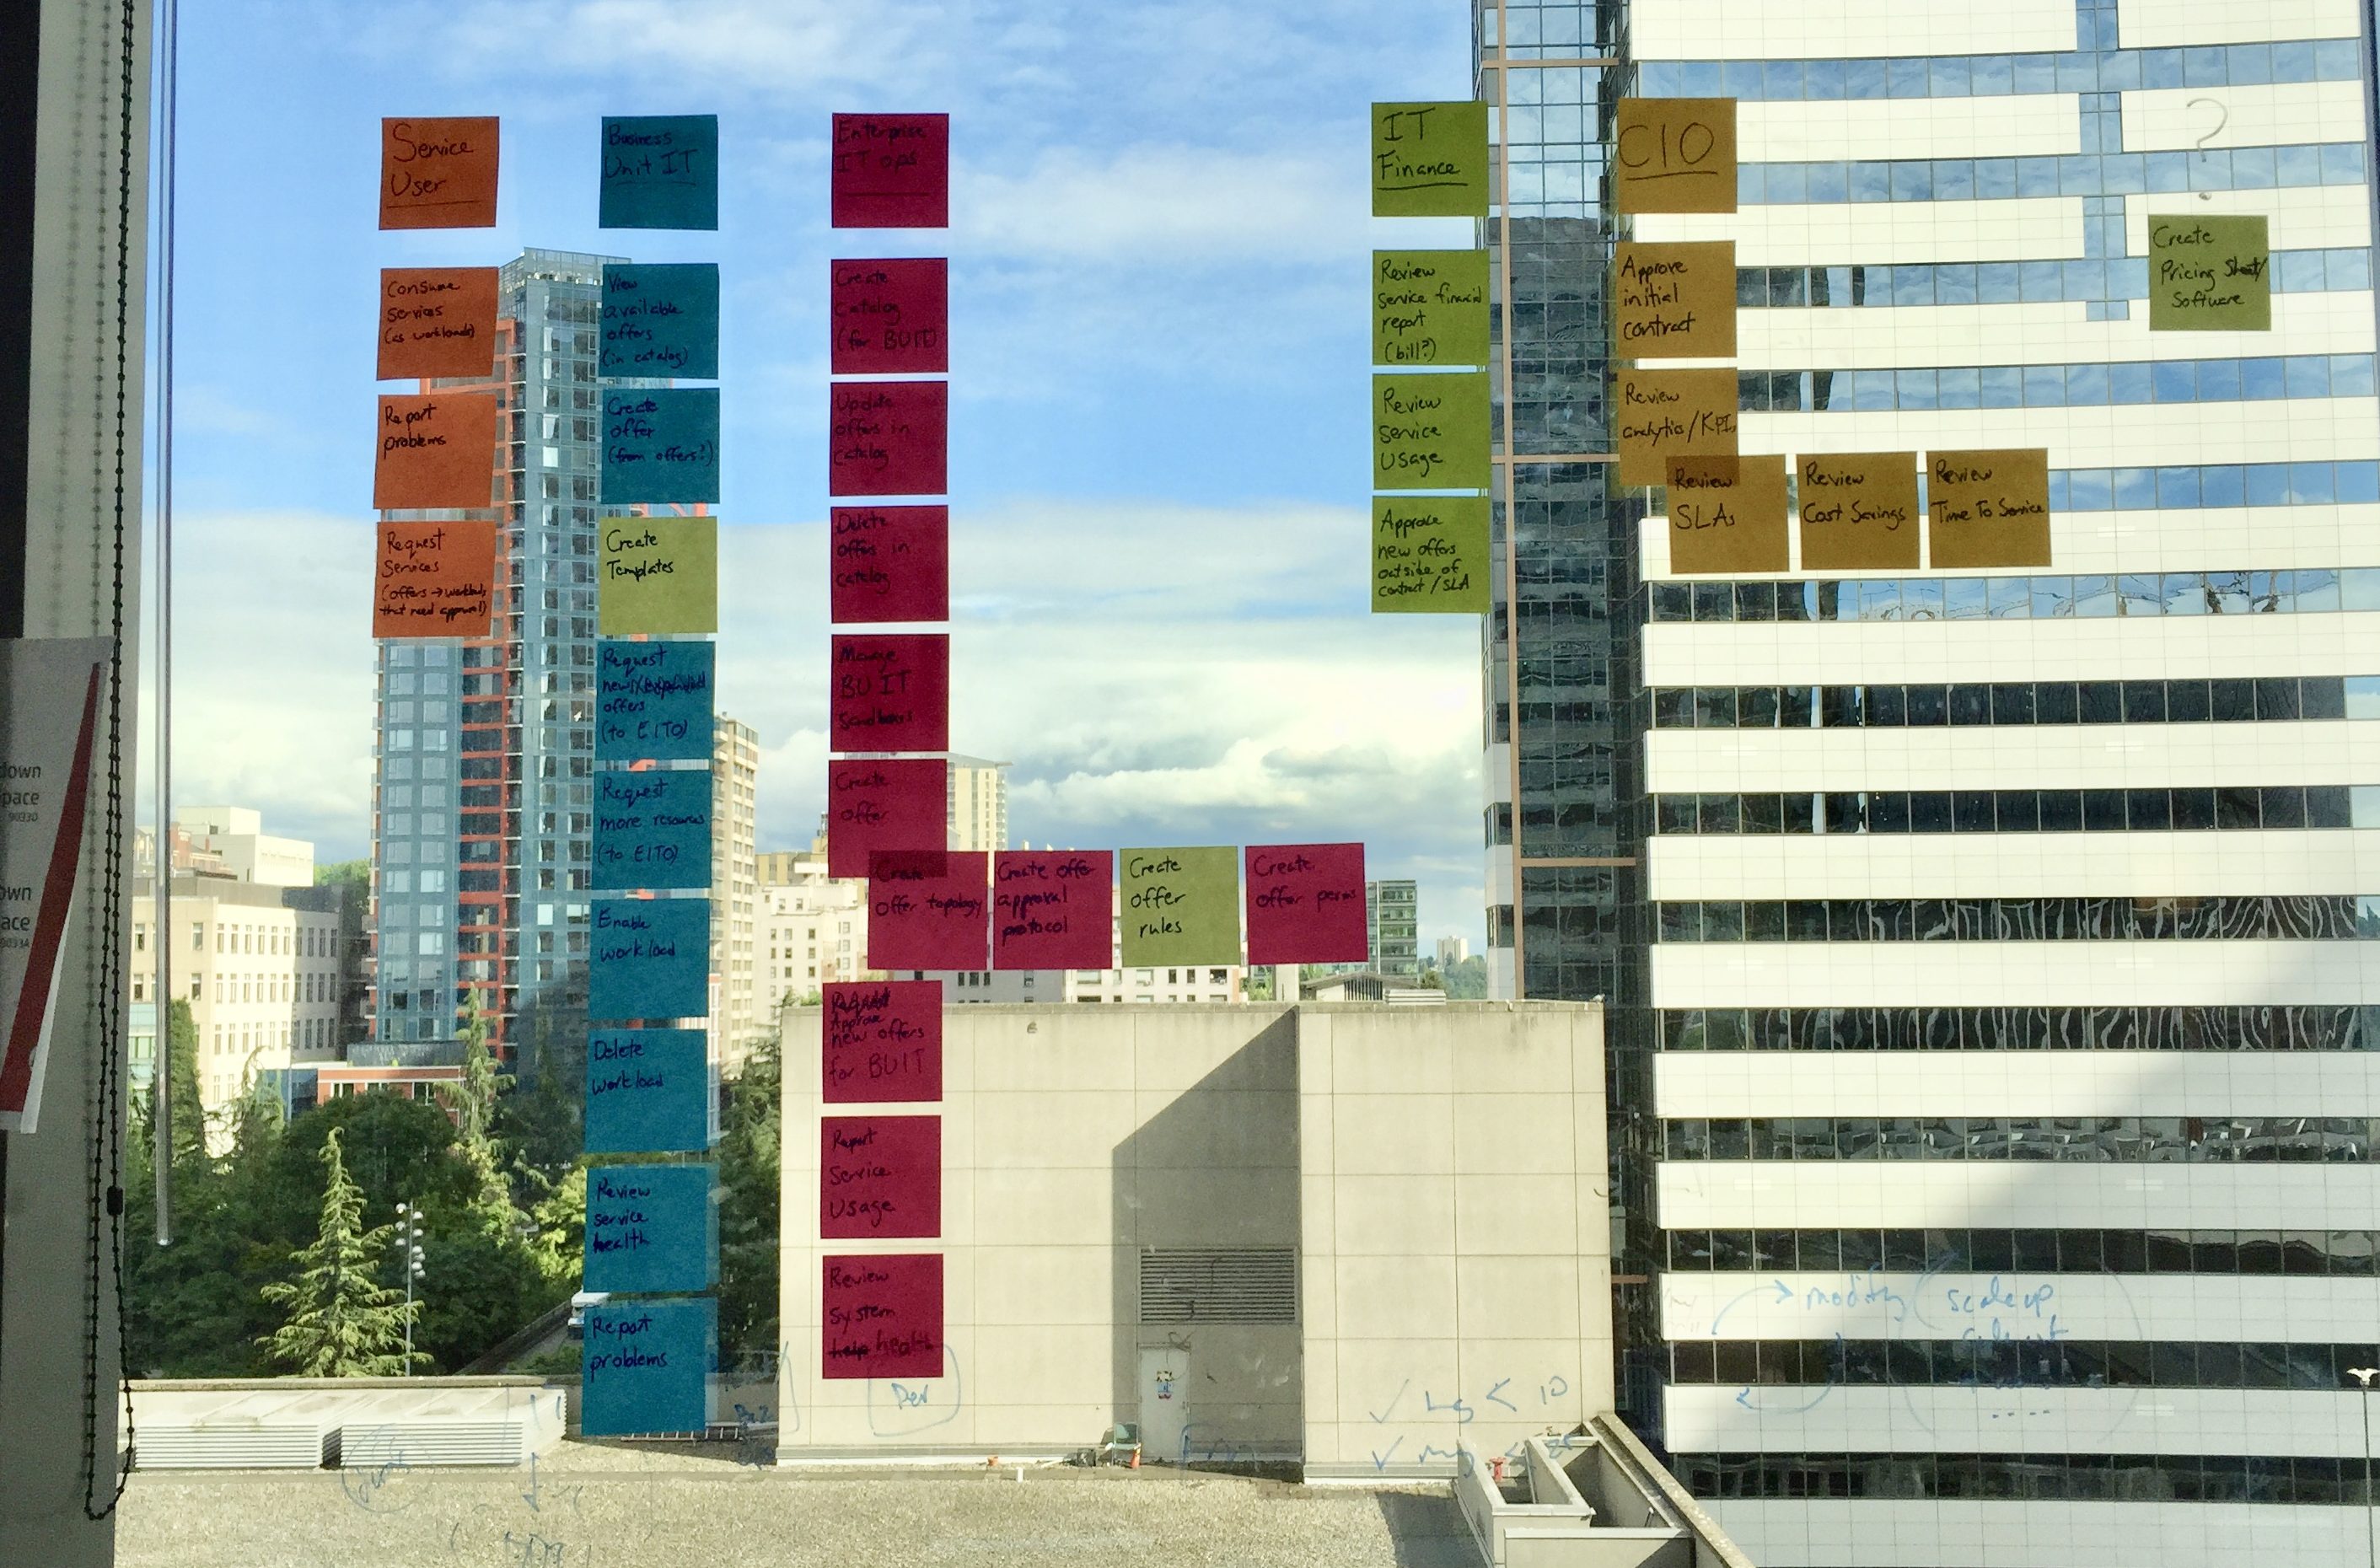 Post-it notes of different colors in columns on an office window